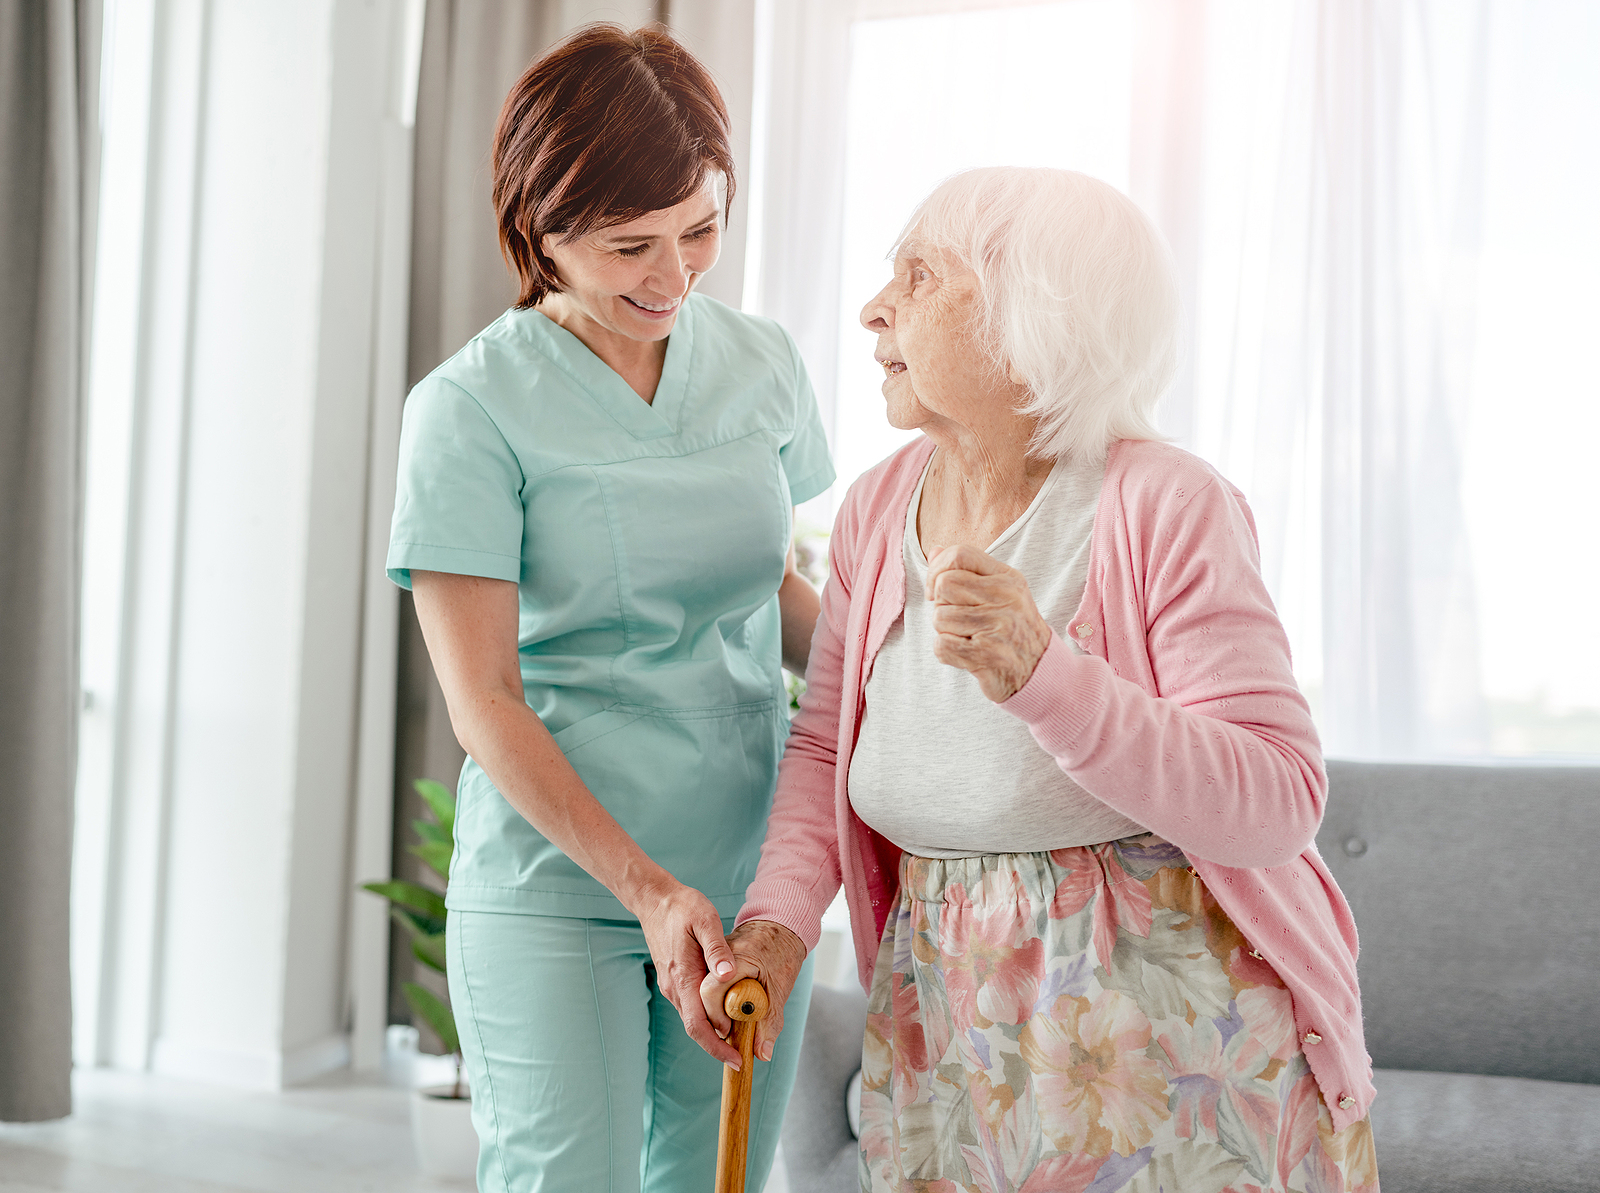 A caregiver is helping a senior woman while out on a walk.